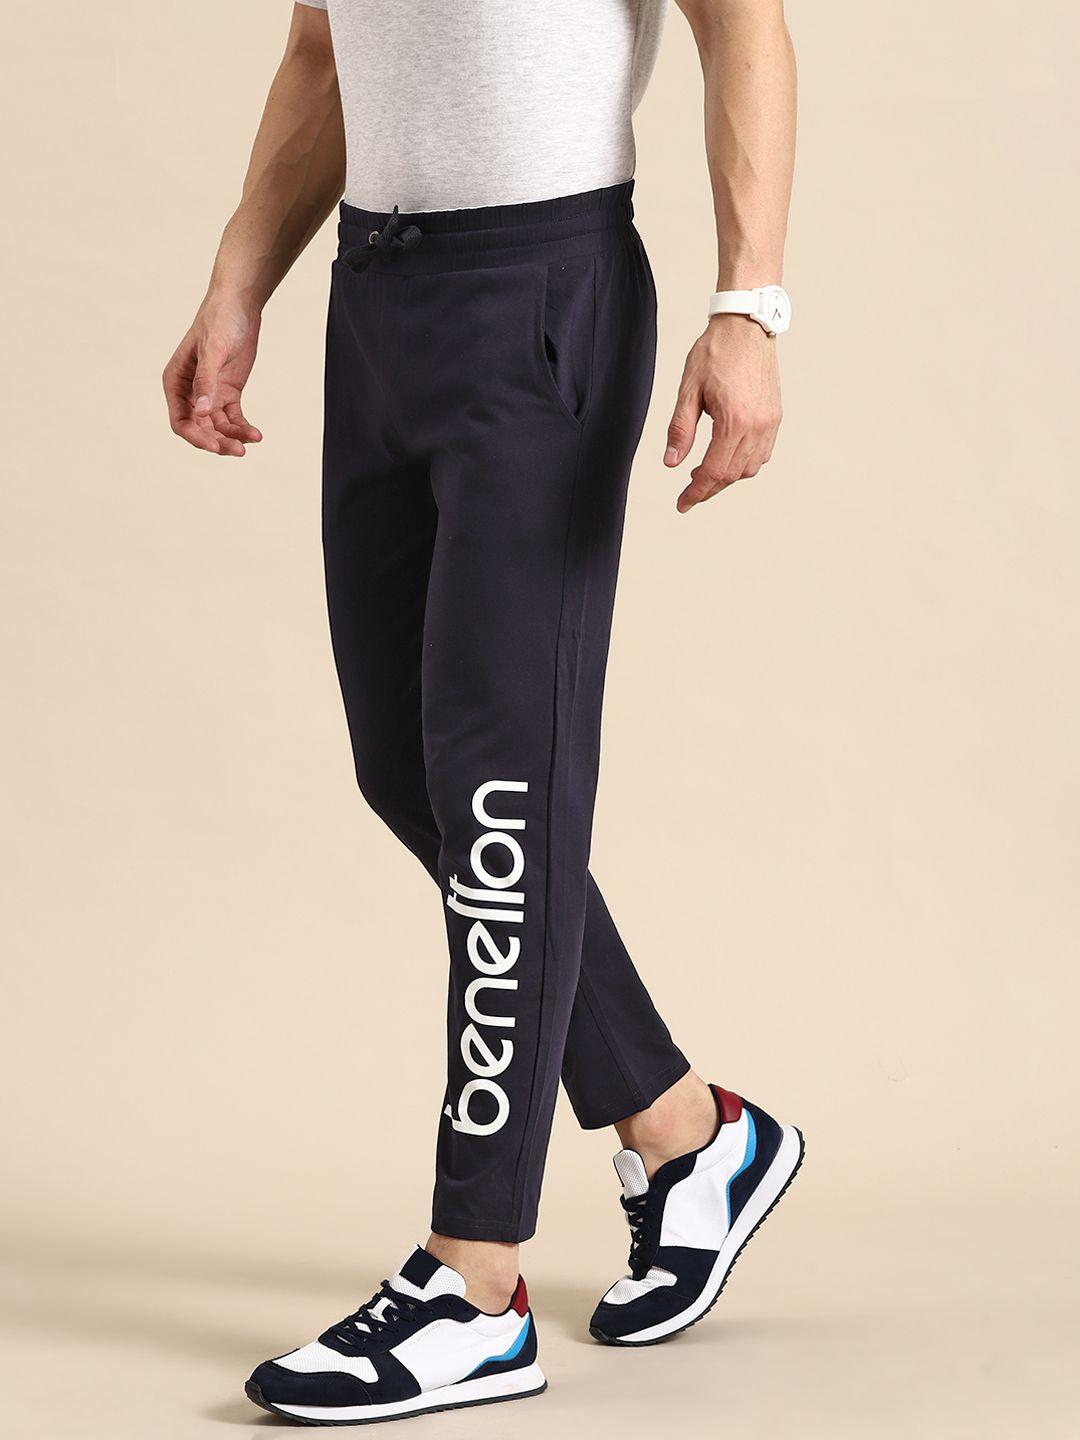 united-colors-of-benetton-men-pure-cotton-brand-logo-printed-track-pants